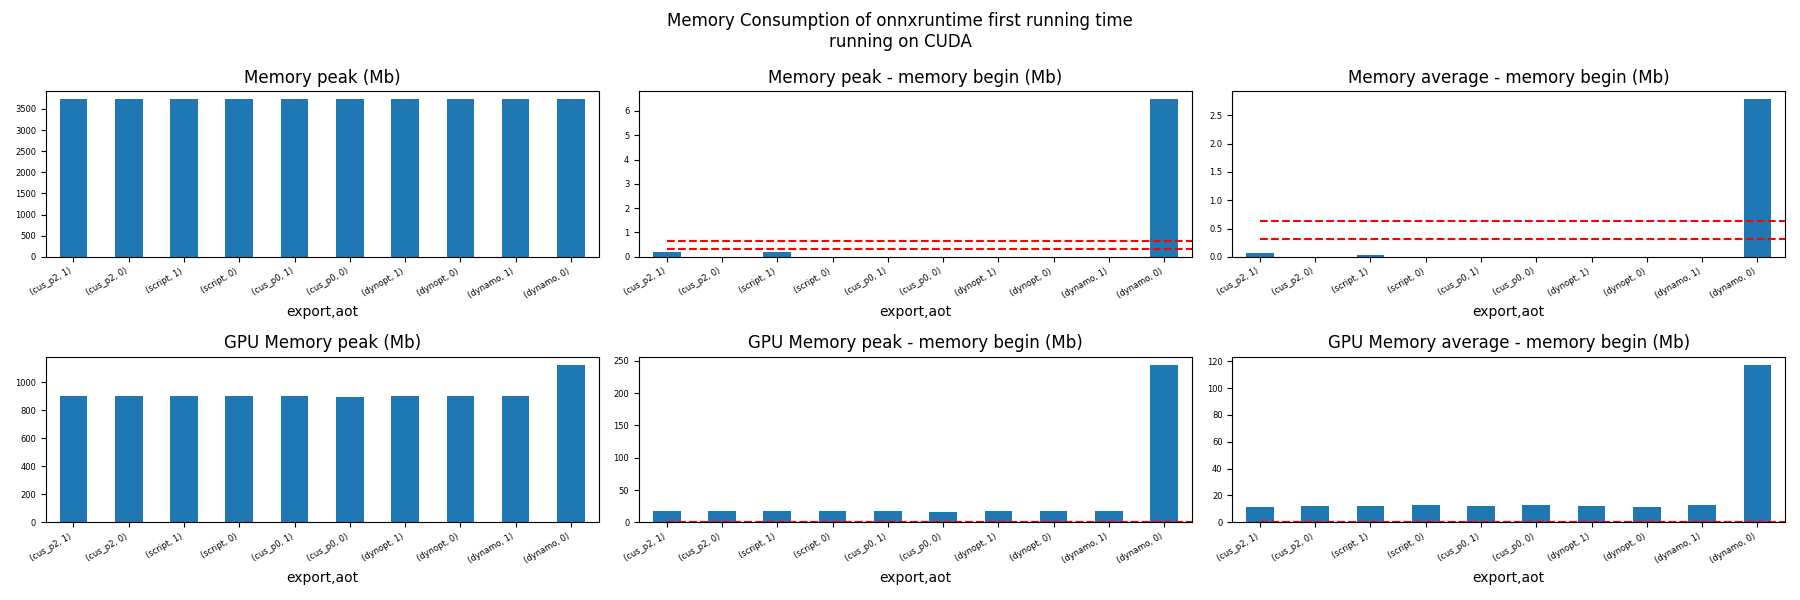 Memory Consumption of onnxruntime first running time running on CUDA, Memory peak (Mb), Memory peak - memory begin (Mb), Memory average - memory begin (Mb), GPU Memory peak (Mb), GPU Memory peak - memory begin (Mb), GPU Memory average - memory begin (Mb)